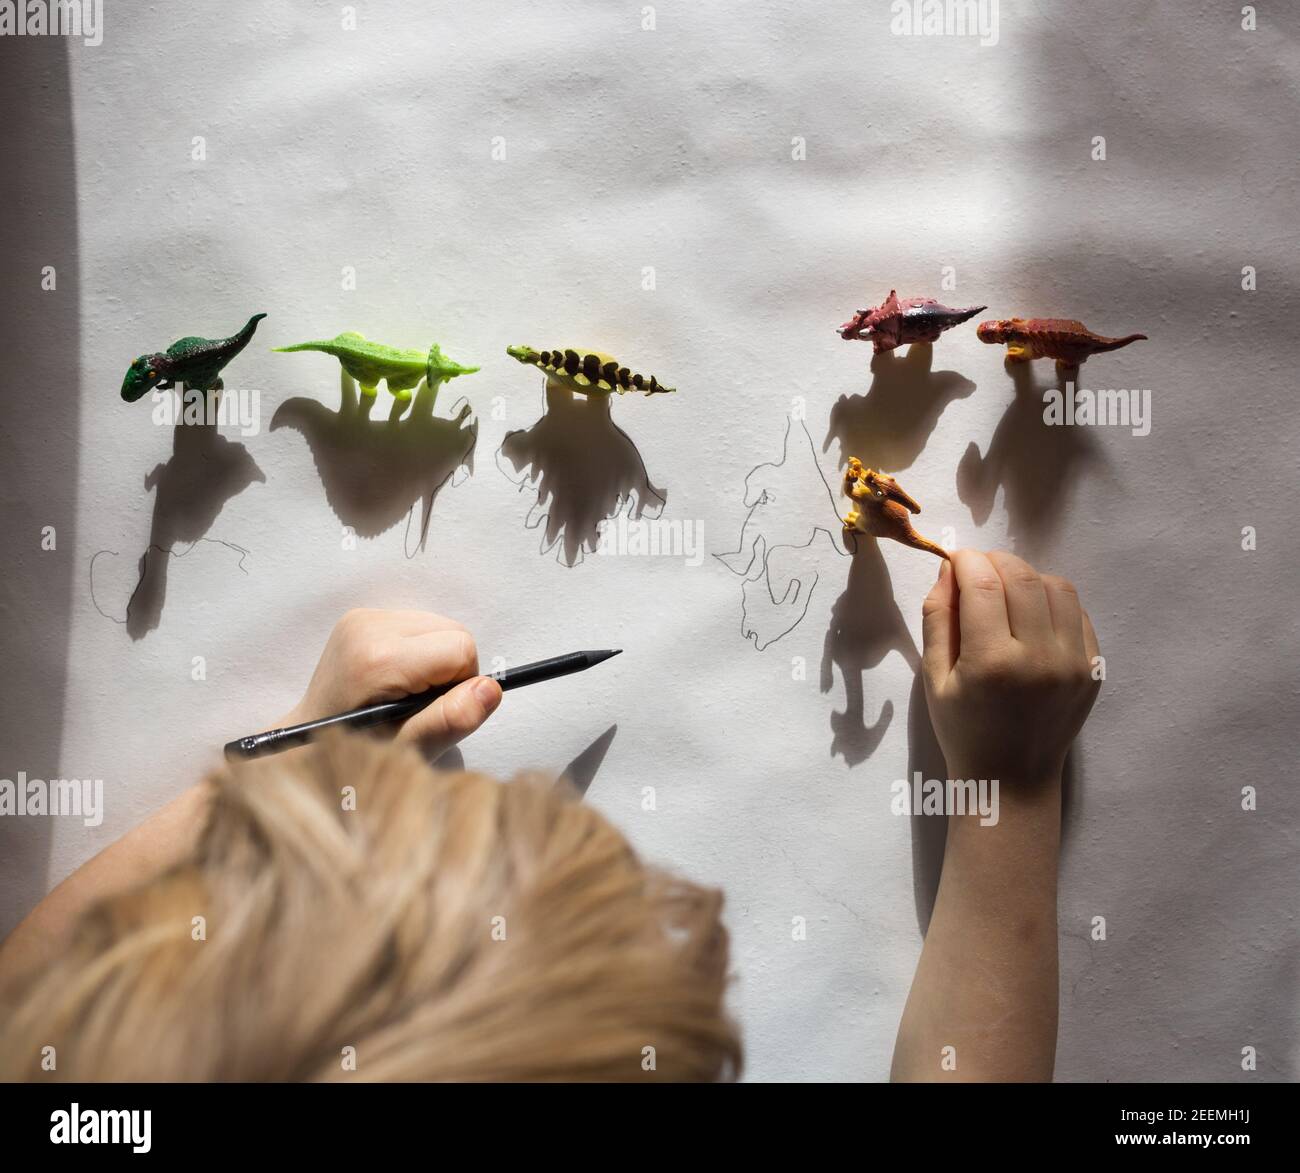 toddler draws with pencil contrasting shadows from toy little dinosaurs standing in a row. drawing of child, creative ideas for children's creativity. Stock Photo